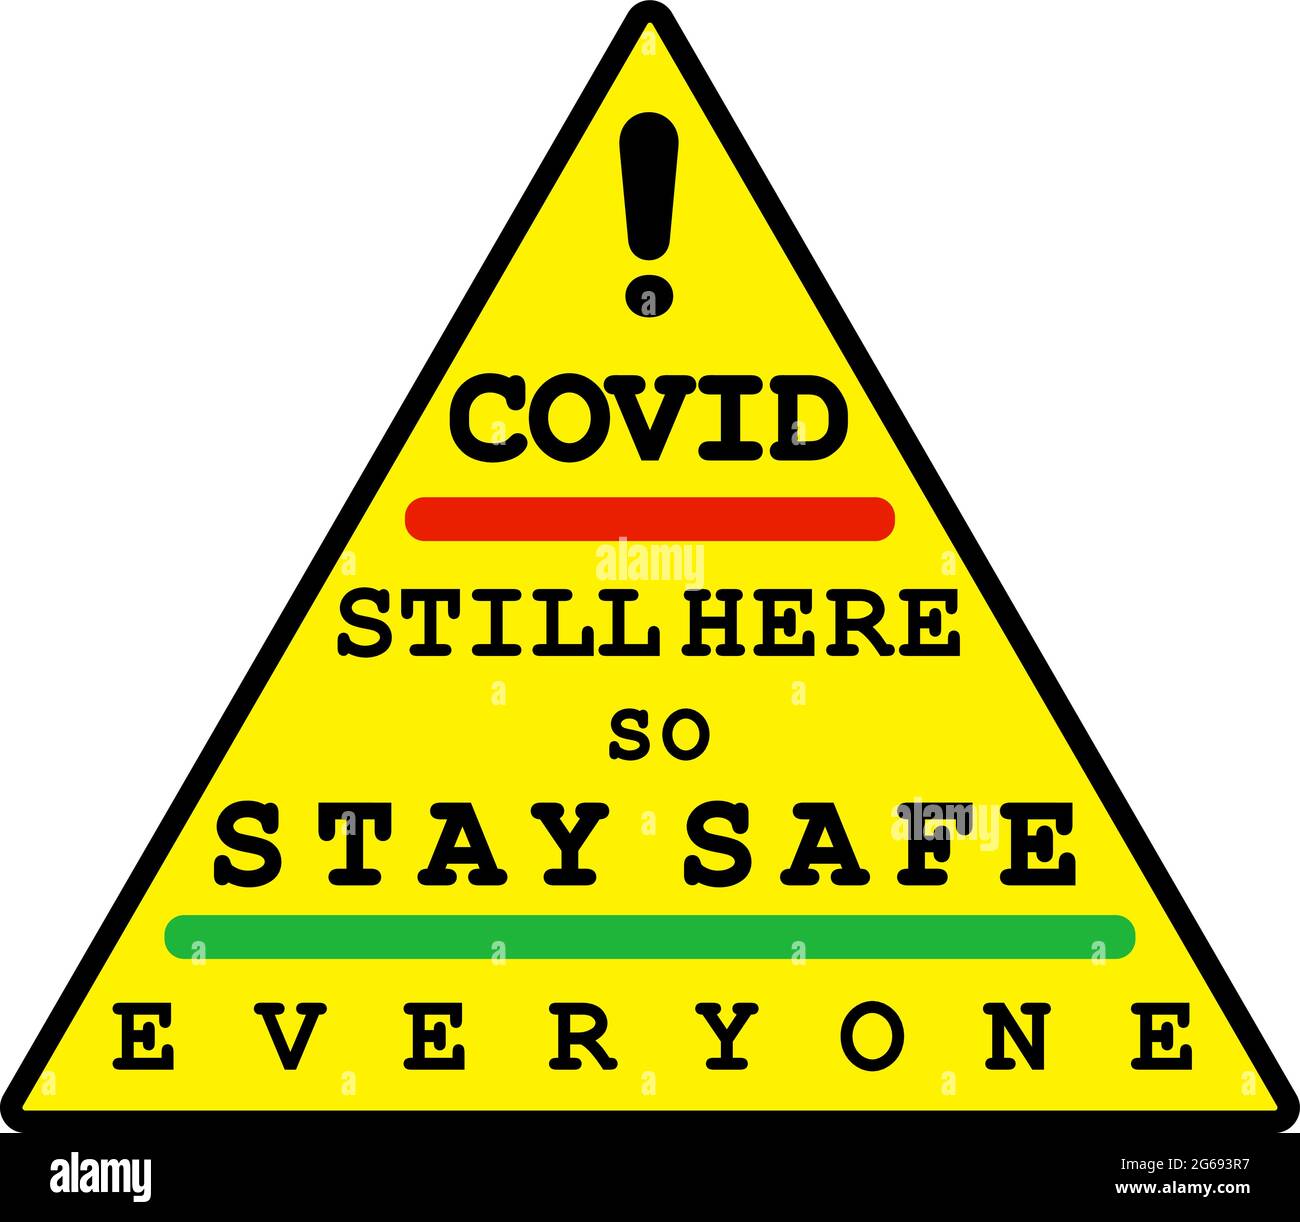 Message to stay safe during COVID-19 pandemic using the combination of modified roadway sign and Snellen chart Stock Vector